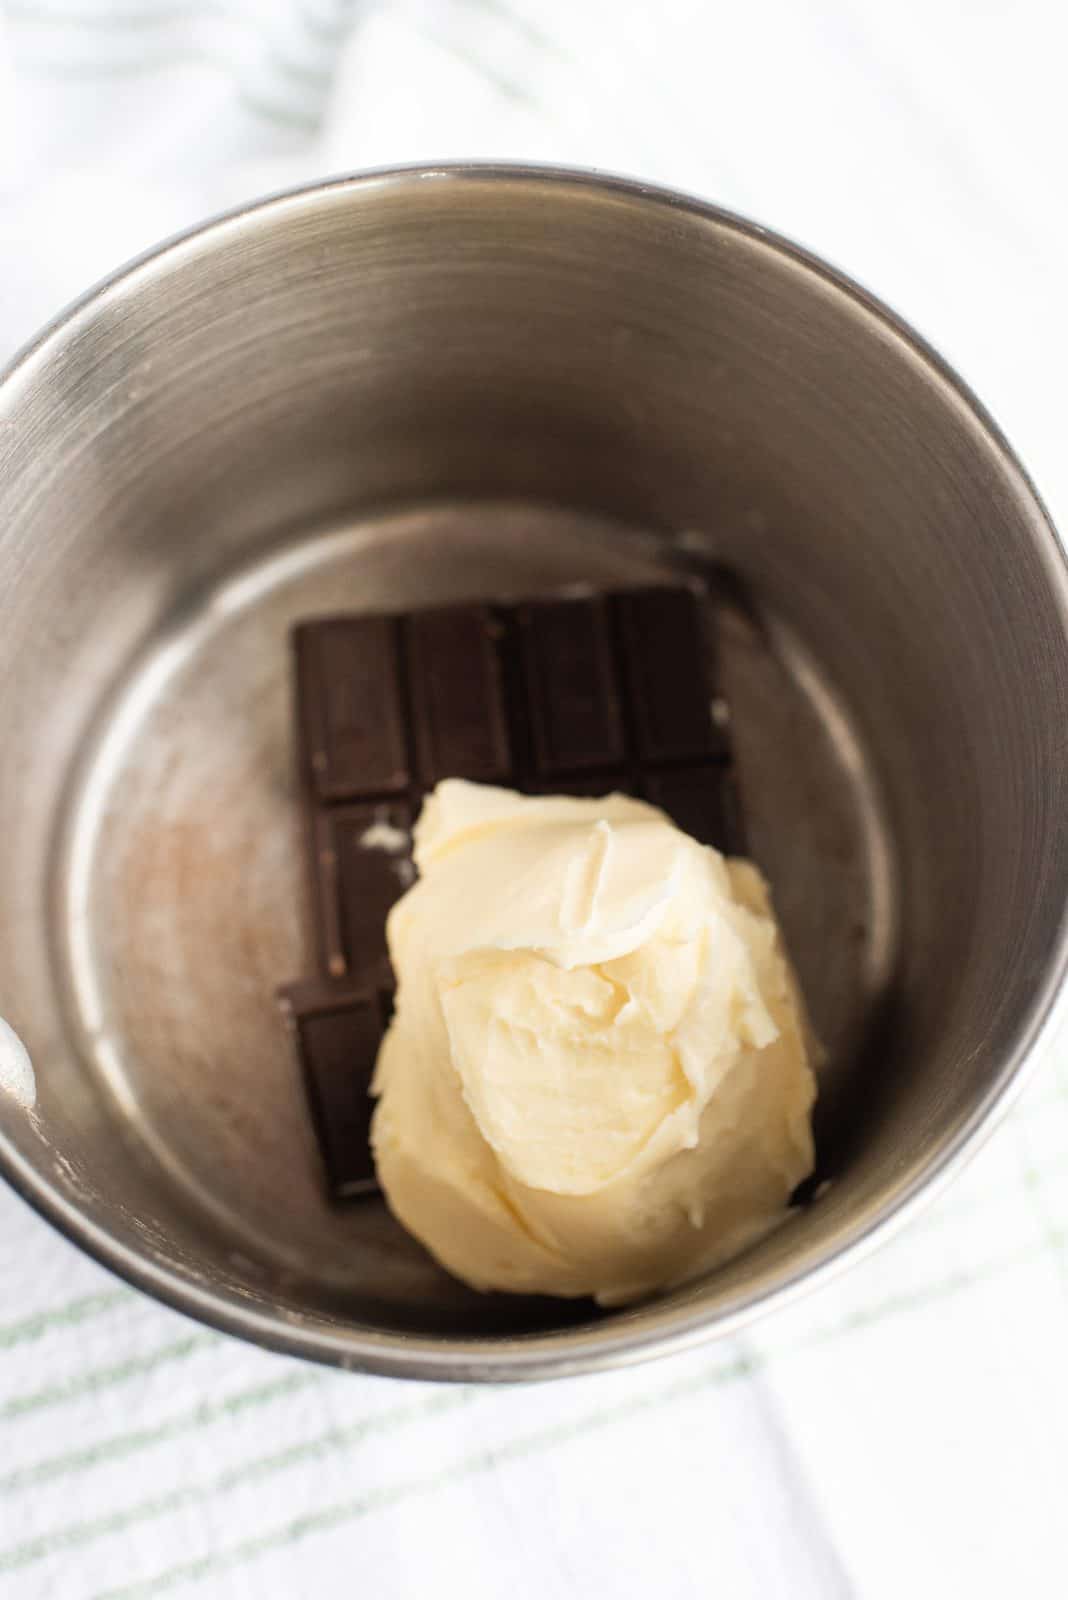 Butter and chocolate in saucepan.